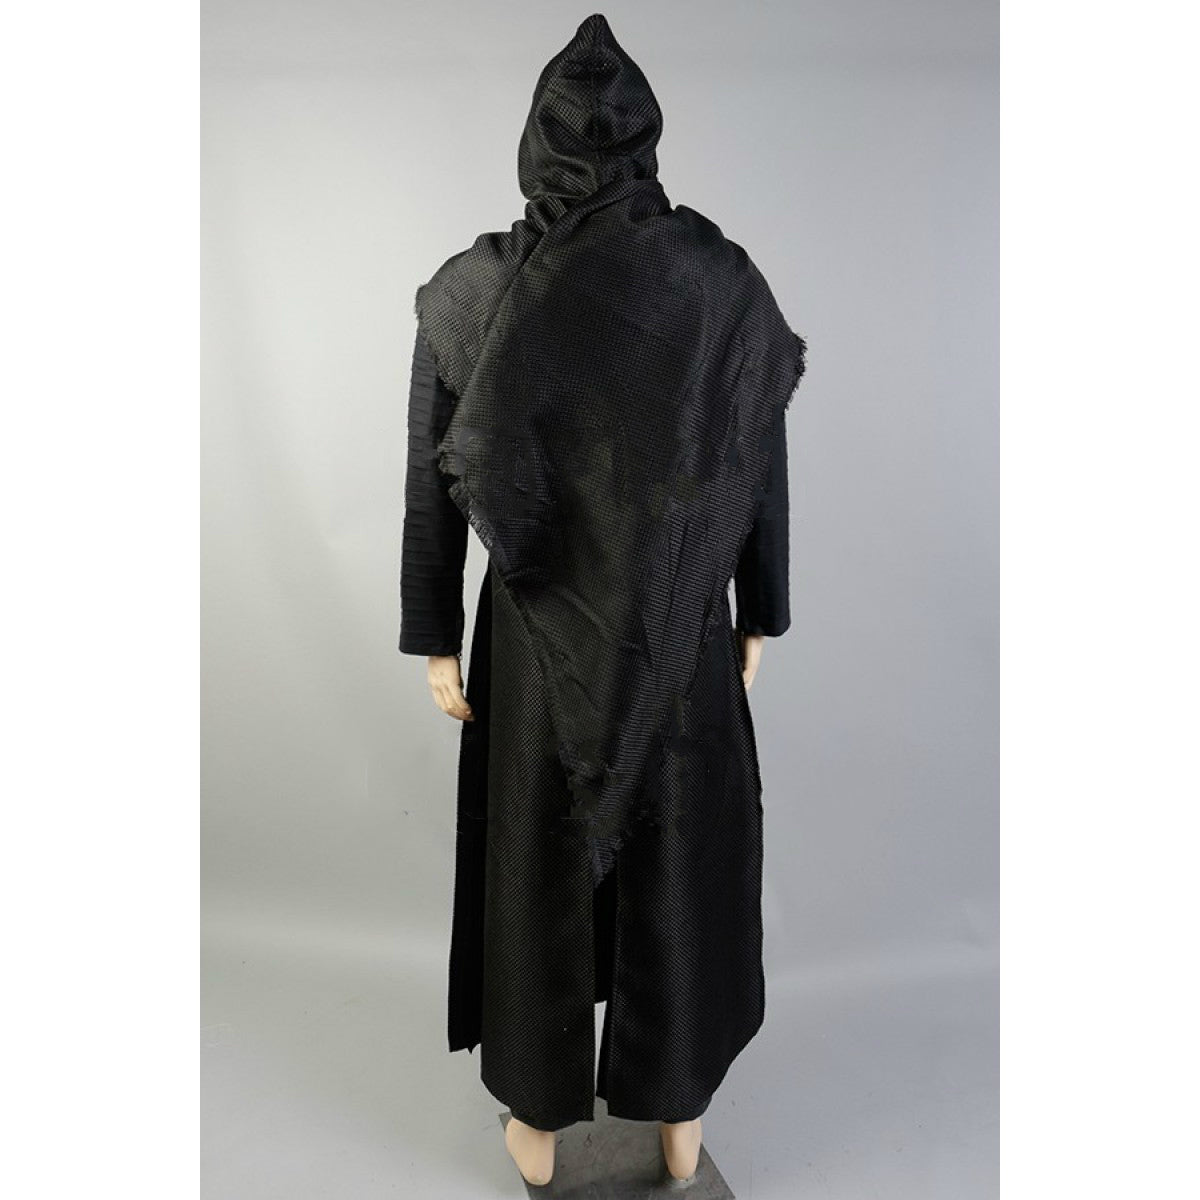 Star Wars Kylo Ren Cosplay Costume Whole Set Outfit – Cosplayrr